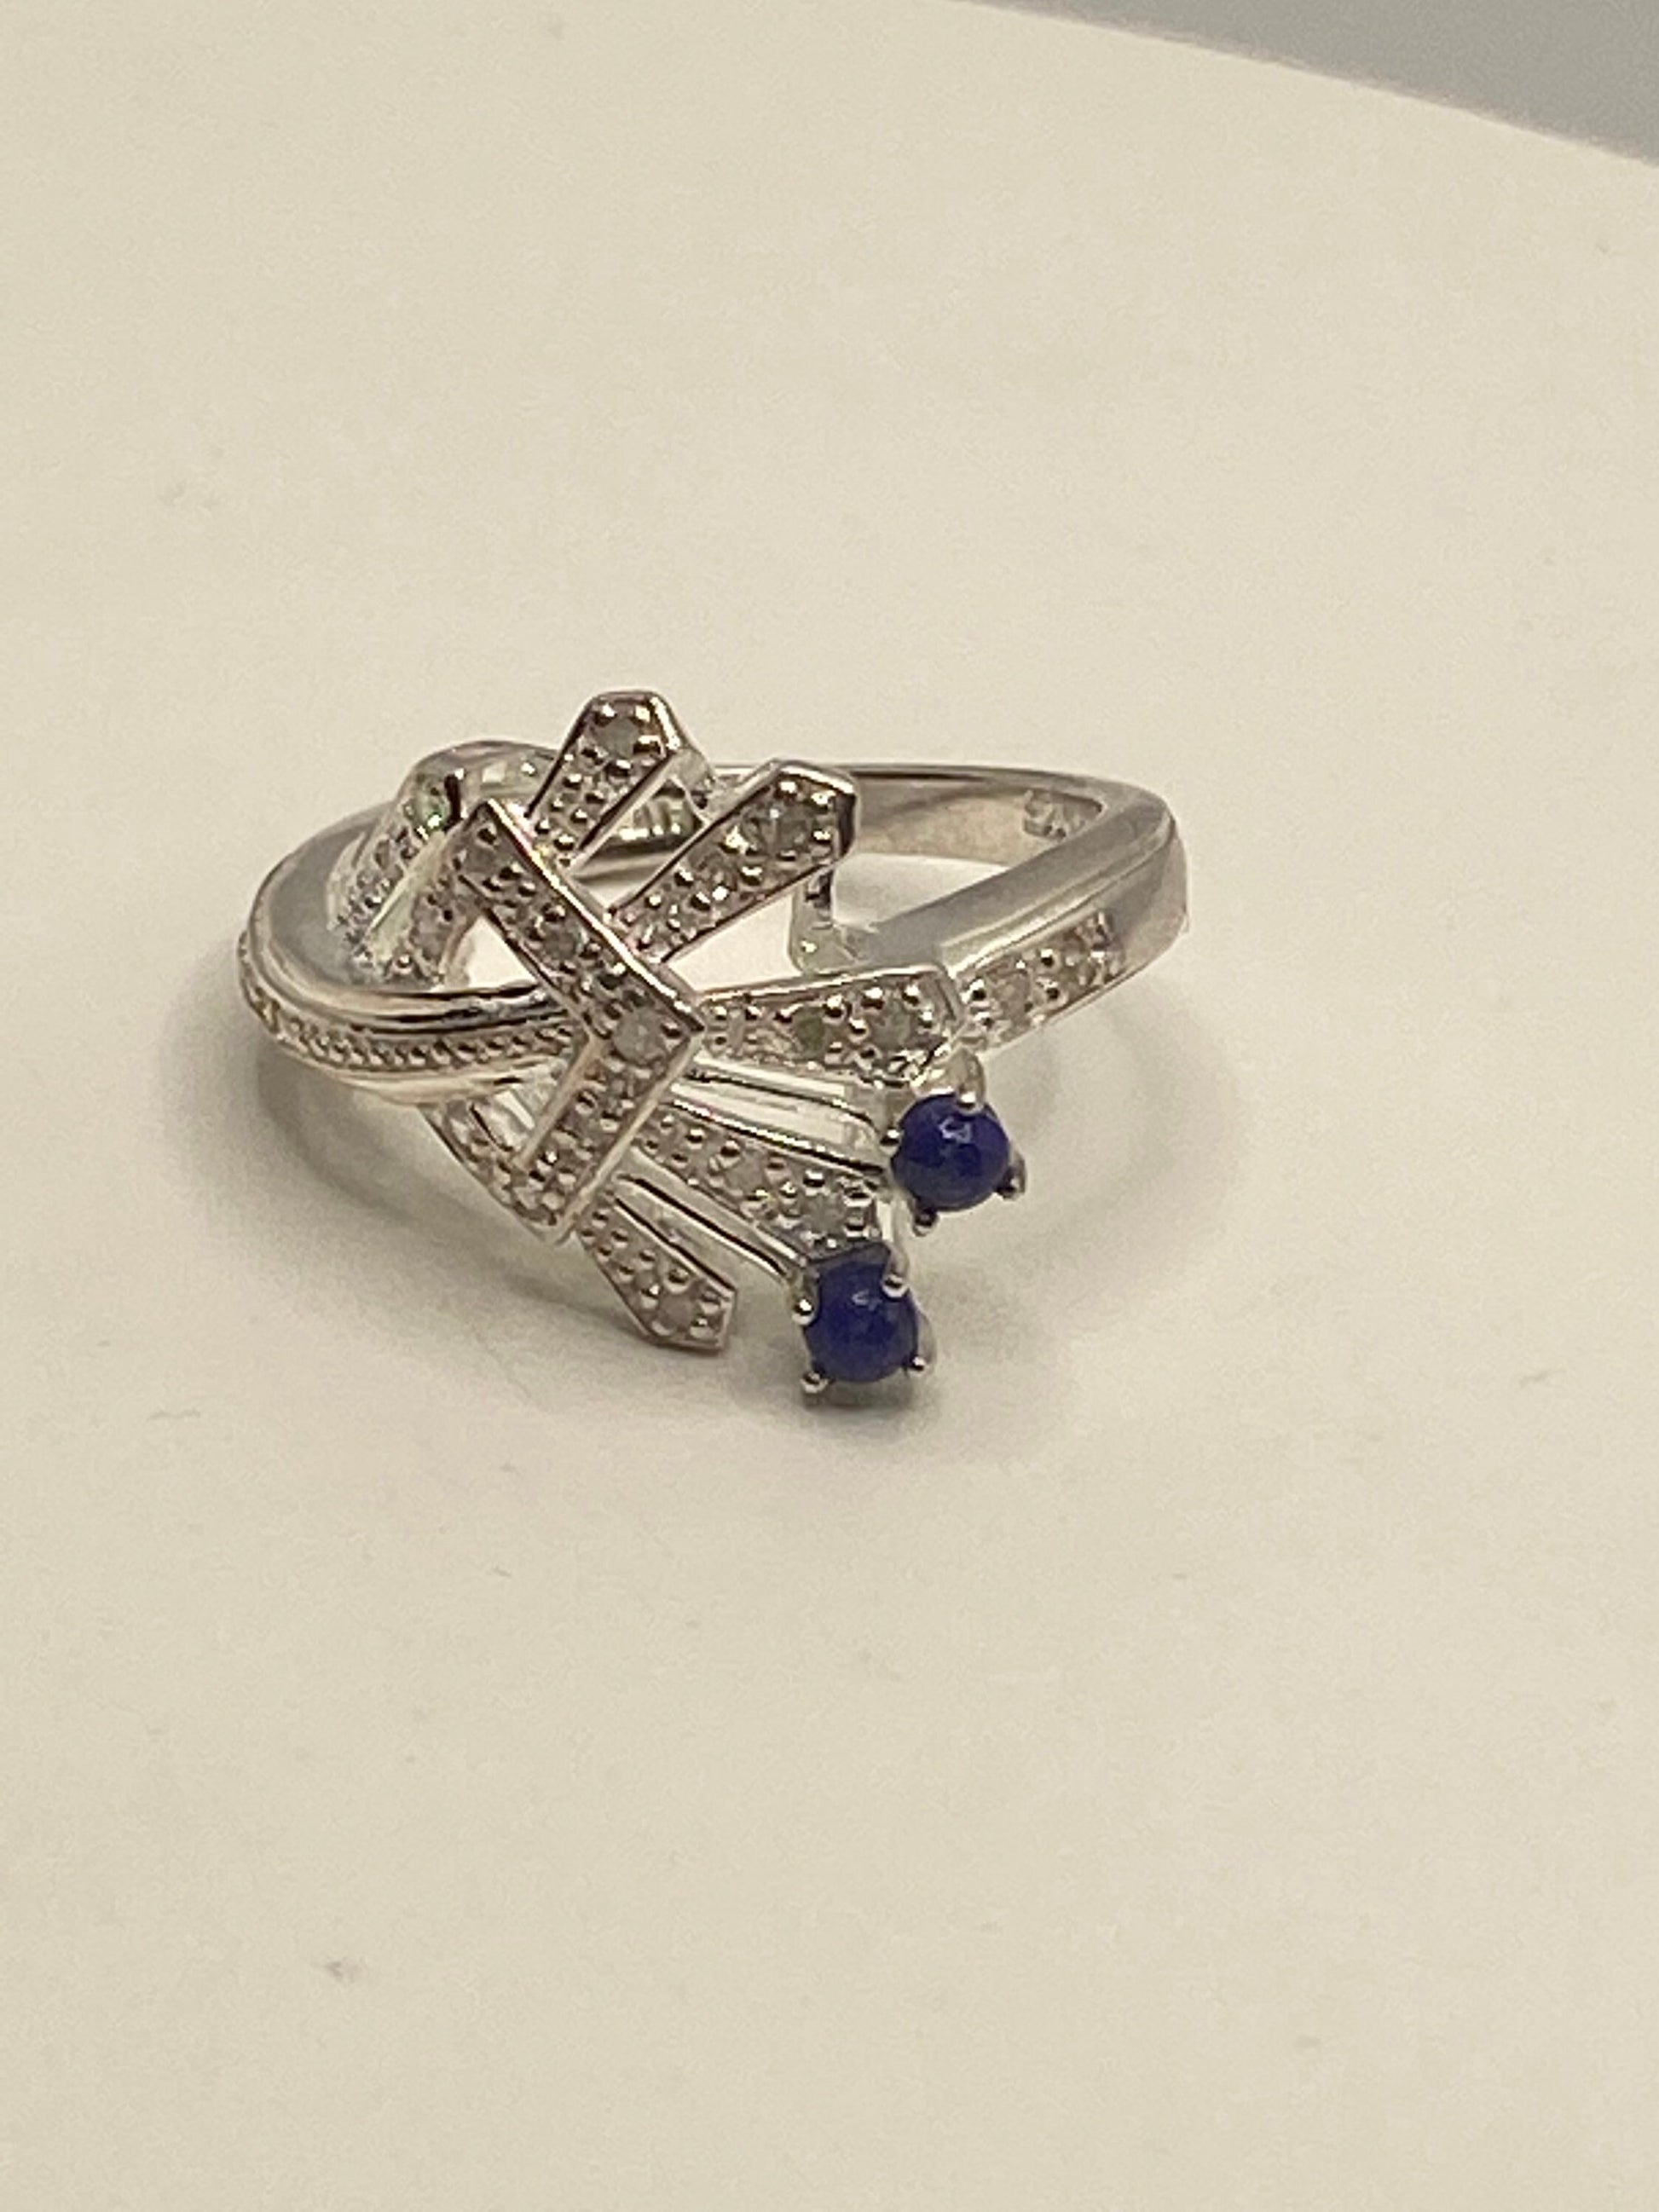 Vintage Handmade Deep Blue and White Sapphire 925 Sterling Silver Gothic Ring